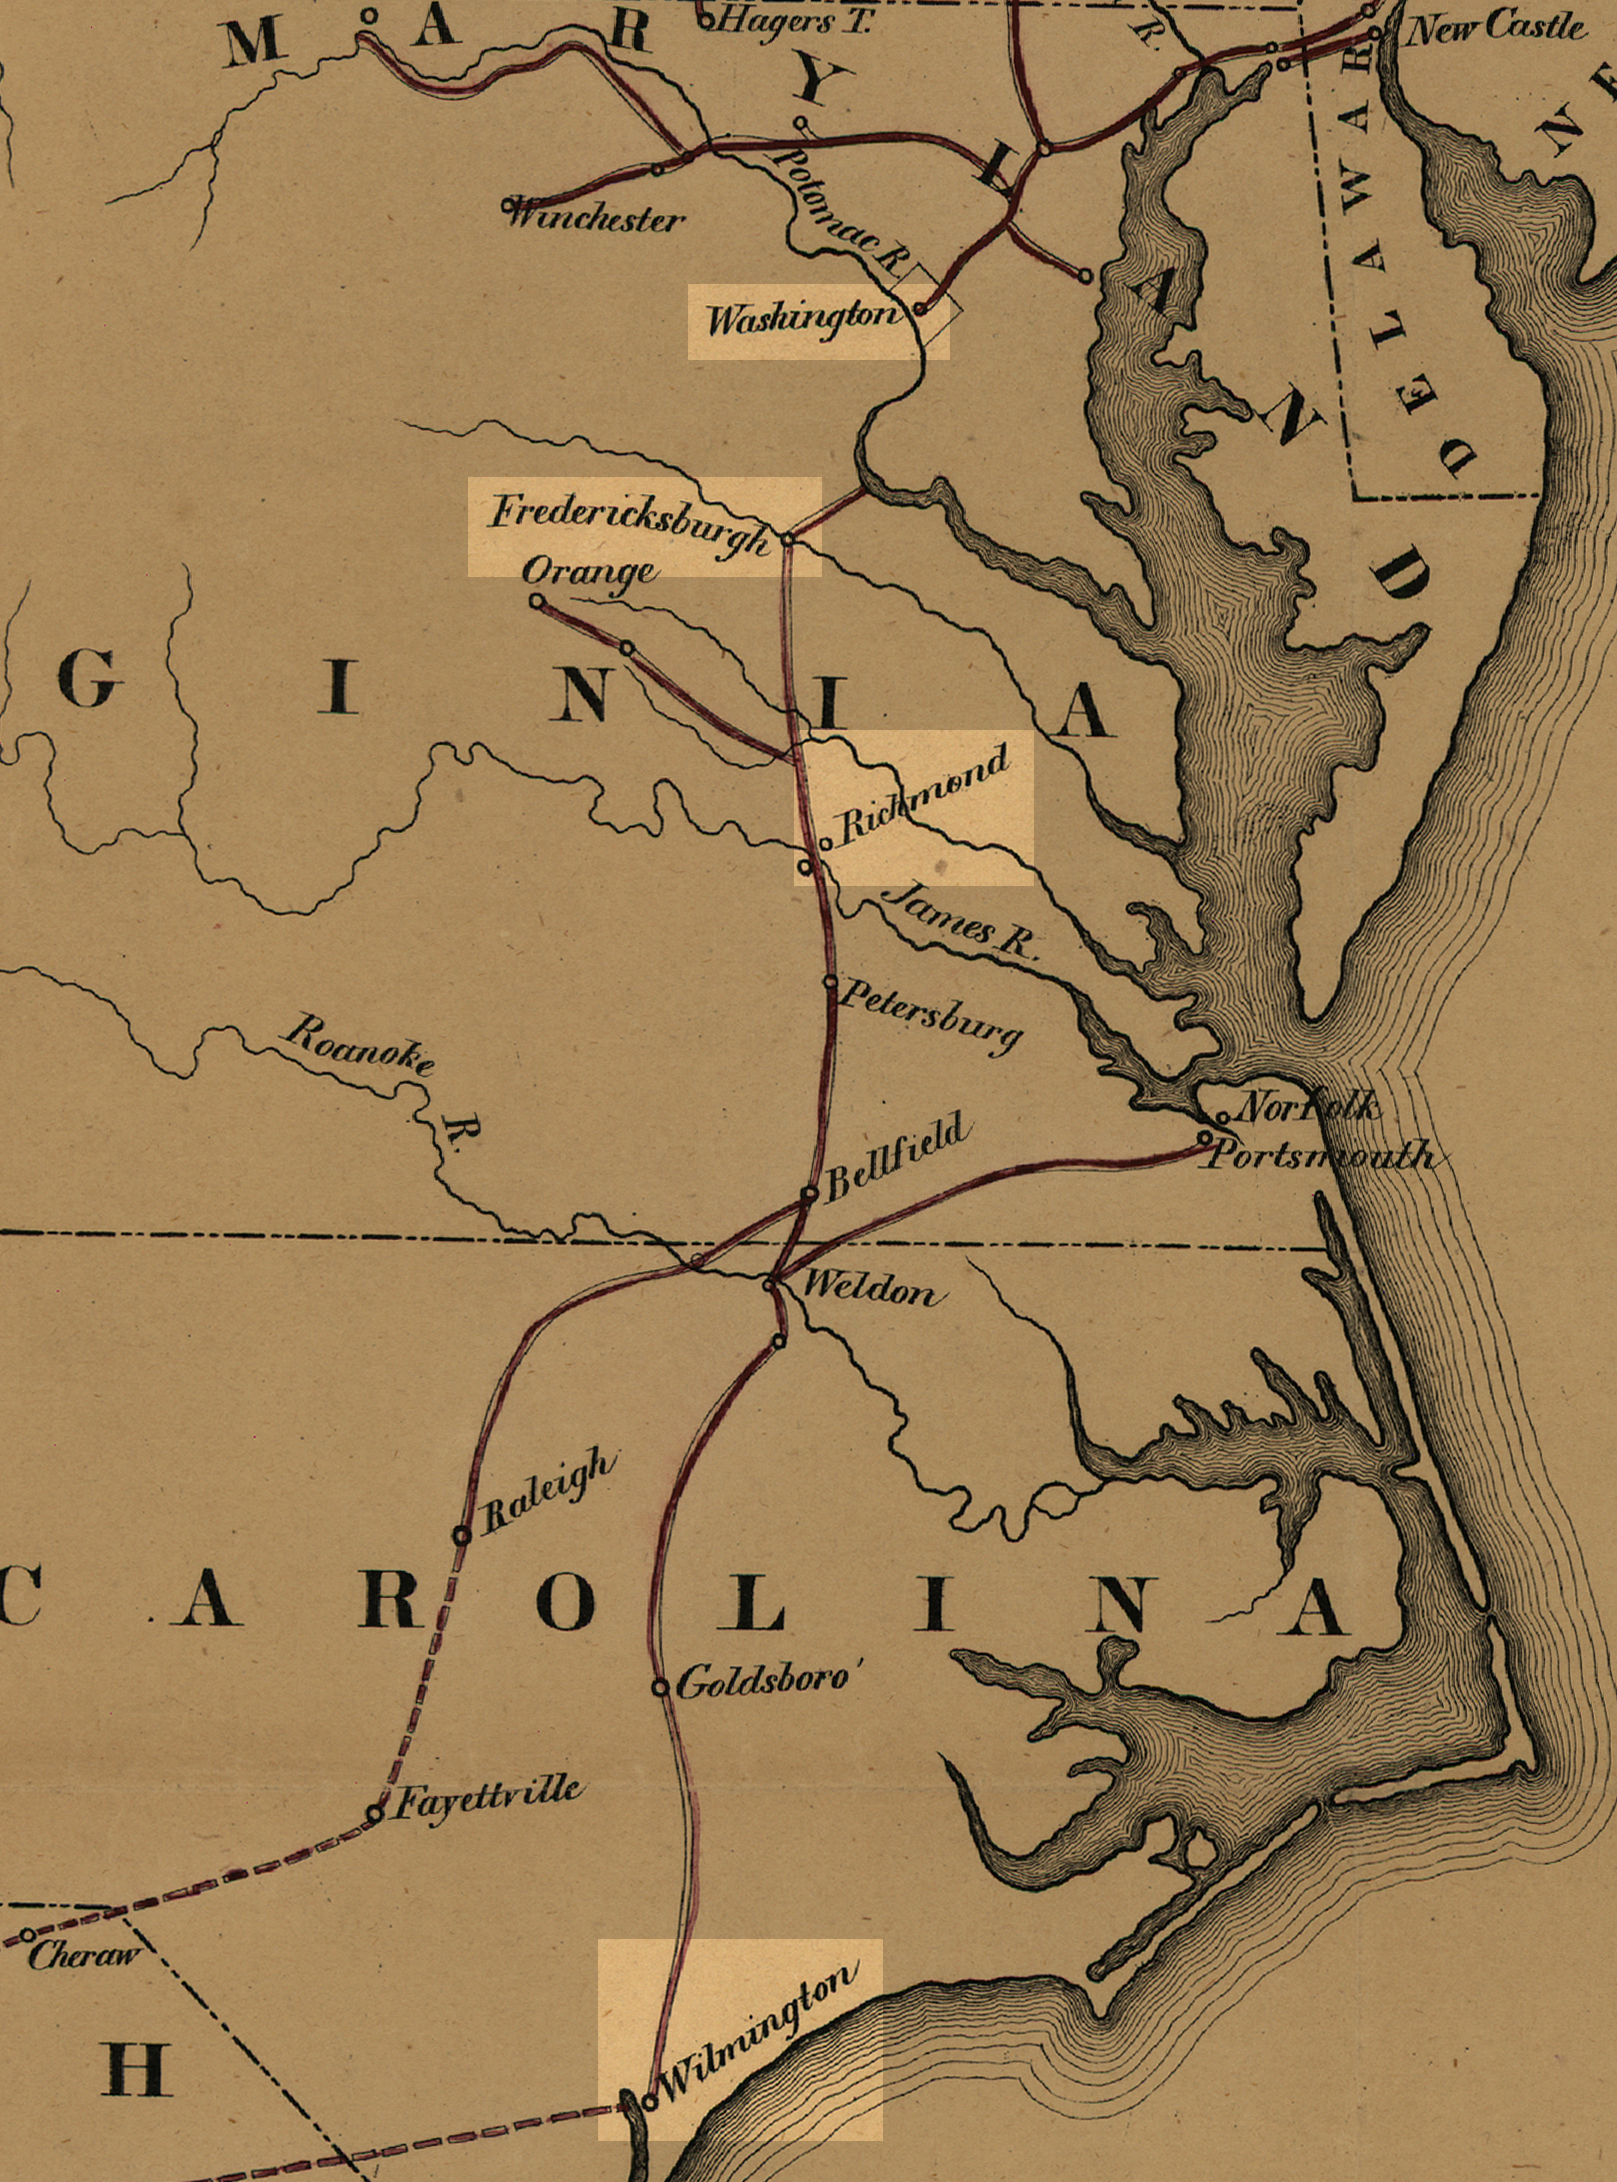 Skeleton Map of railroad lines from Wilmington, North Carolina to Washington D.C.